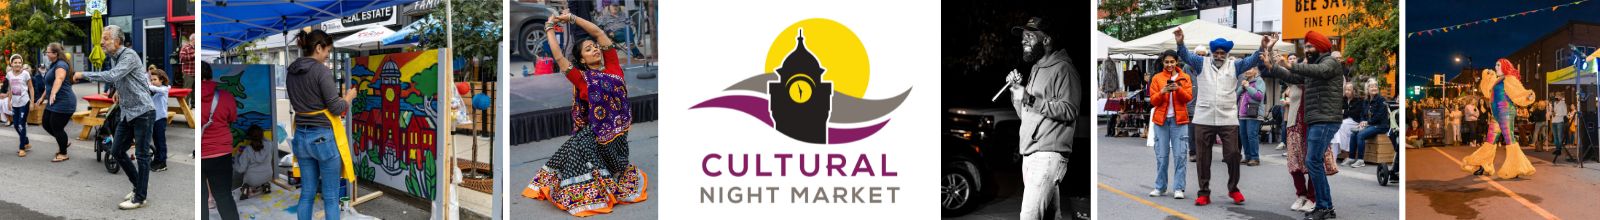 Cultural Night Market Event Banner with Photos From Past Years